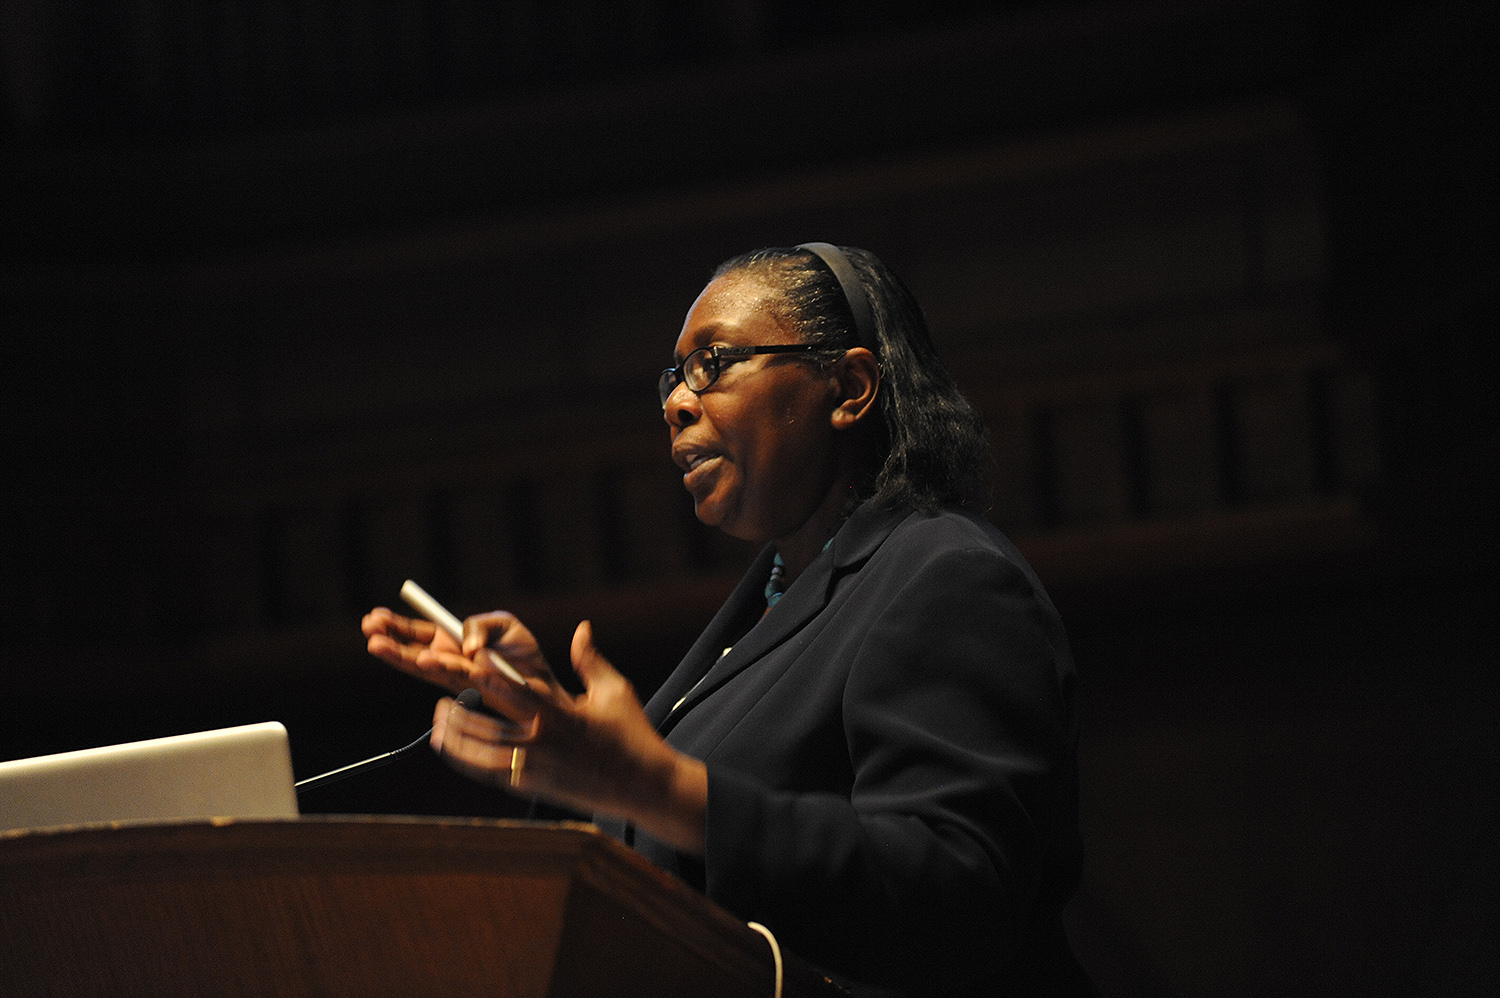 Taylor is professor, James E. Crowfood Collegiate Chair, and director of diversity, equity and inclusion at the University of Michigan. She is past chair of the environment and technology section of the American Sociological Association.